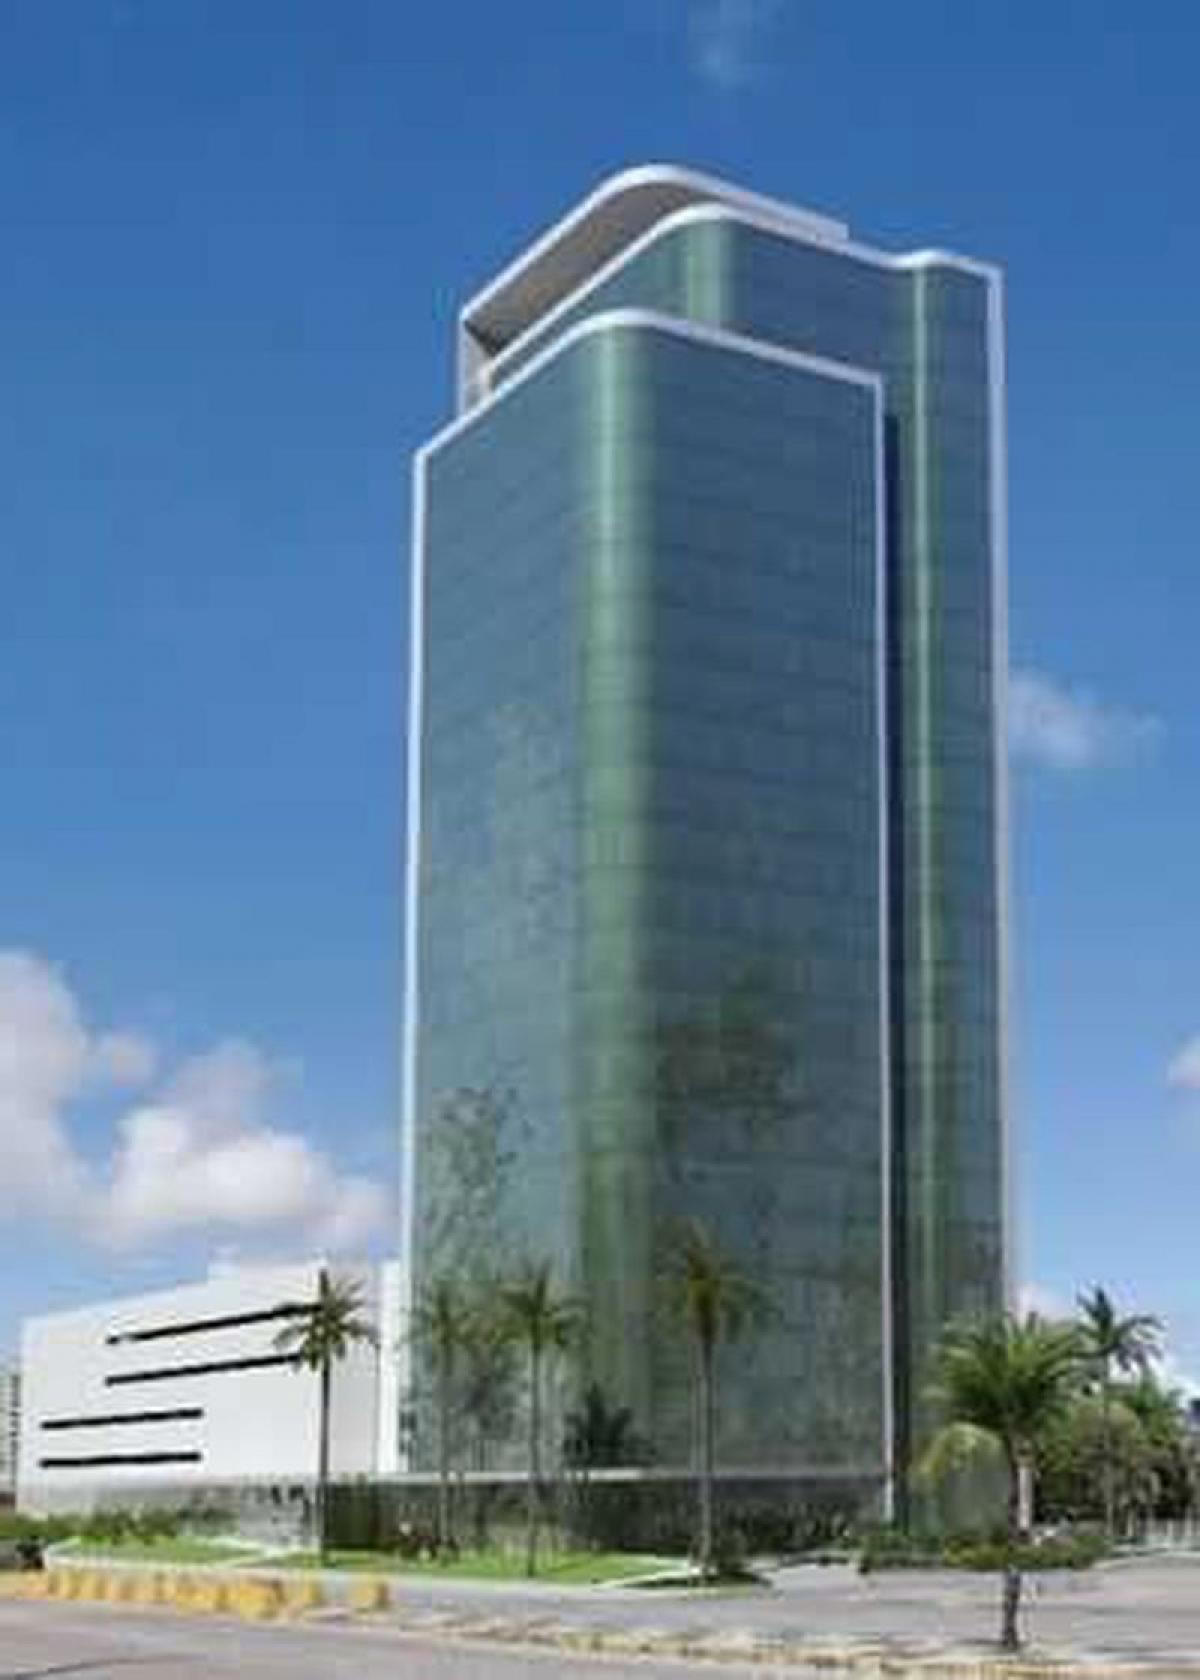 Picture of Commercial Building For Sale in Recife, Pernambuco, Brazil